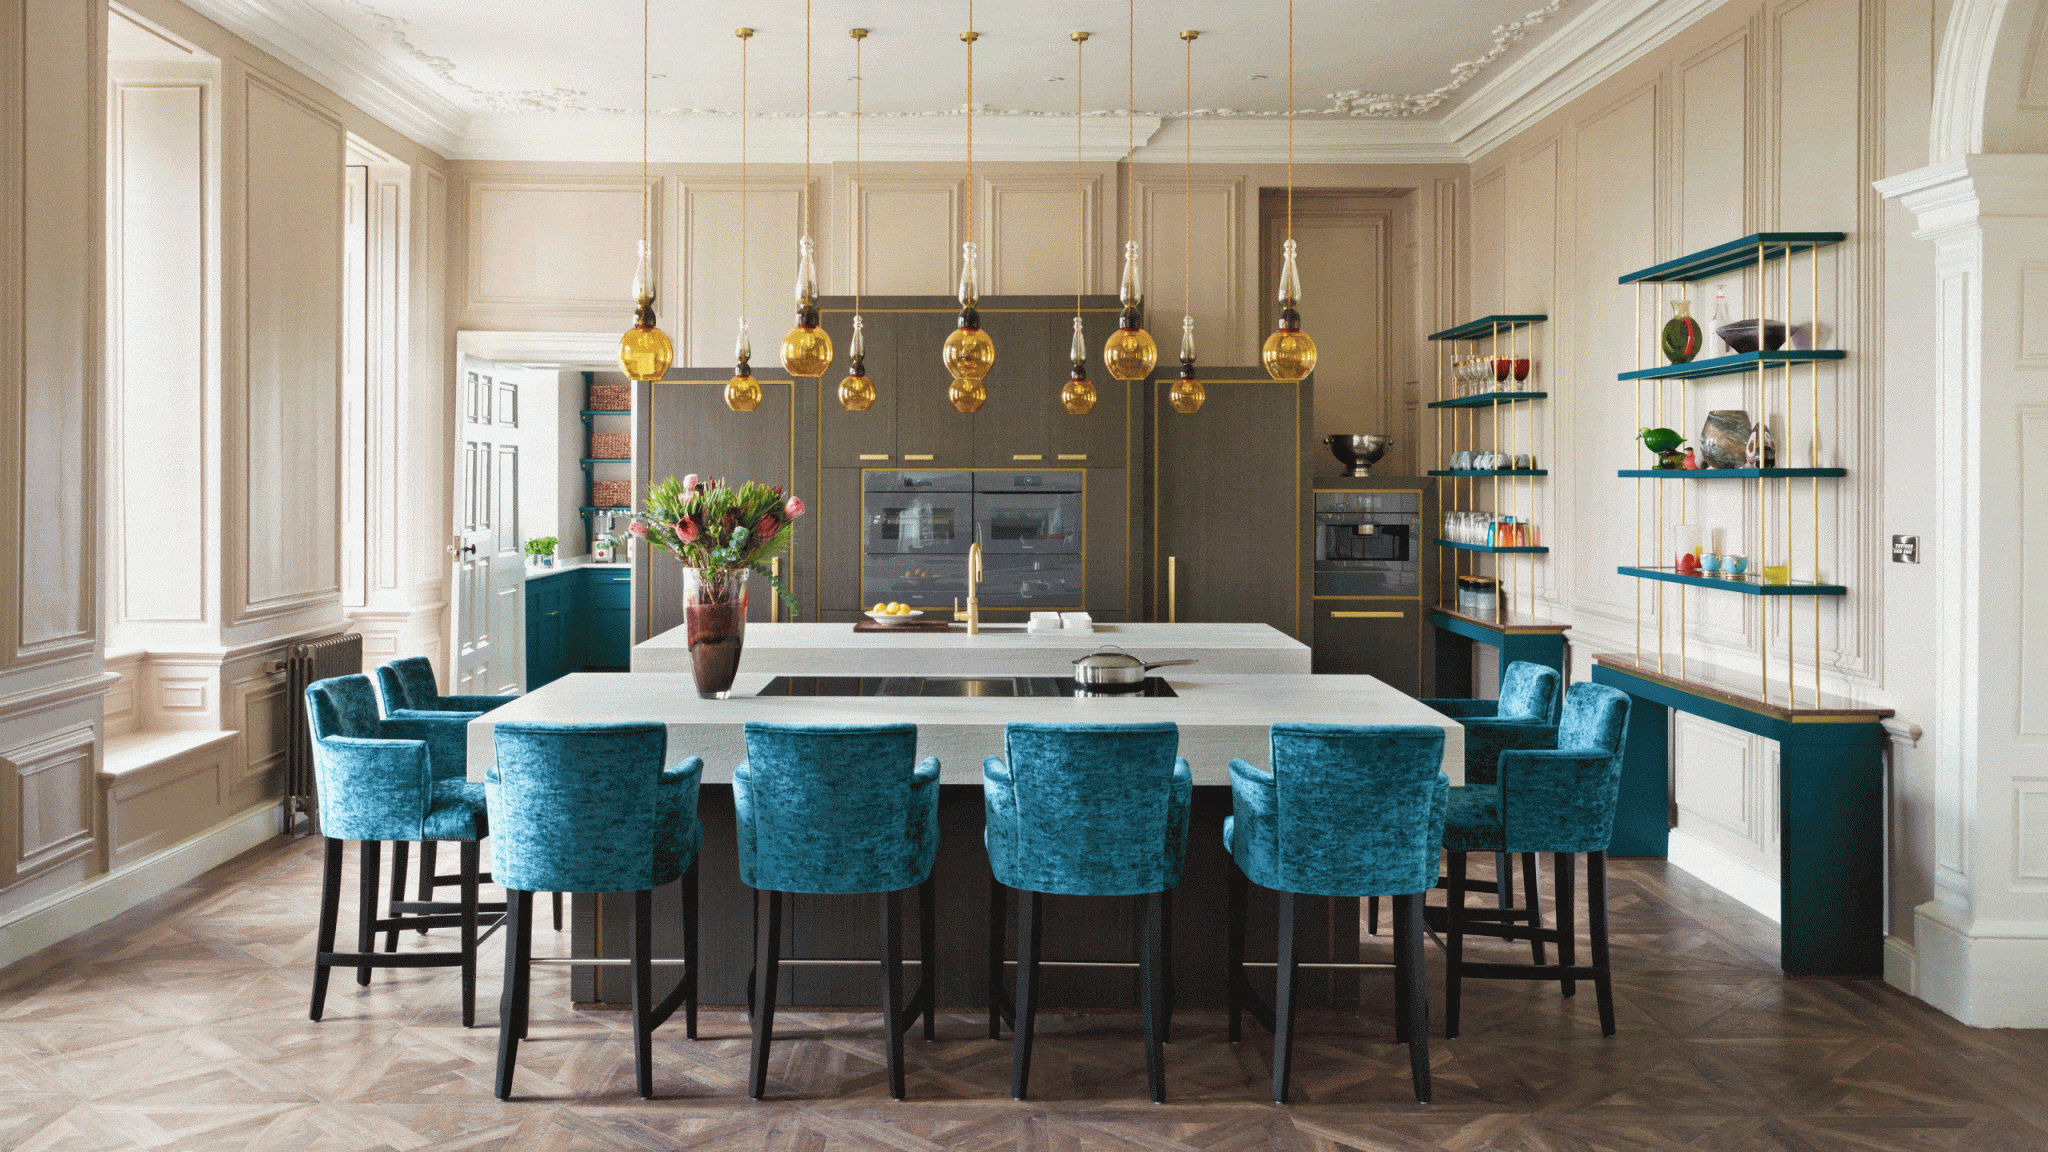 15 Glam Kitchen Ideas for an Fashionable Space